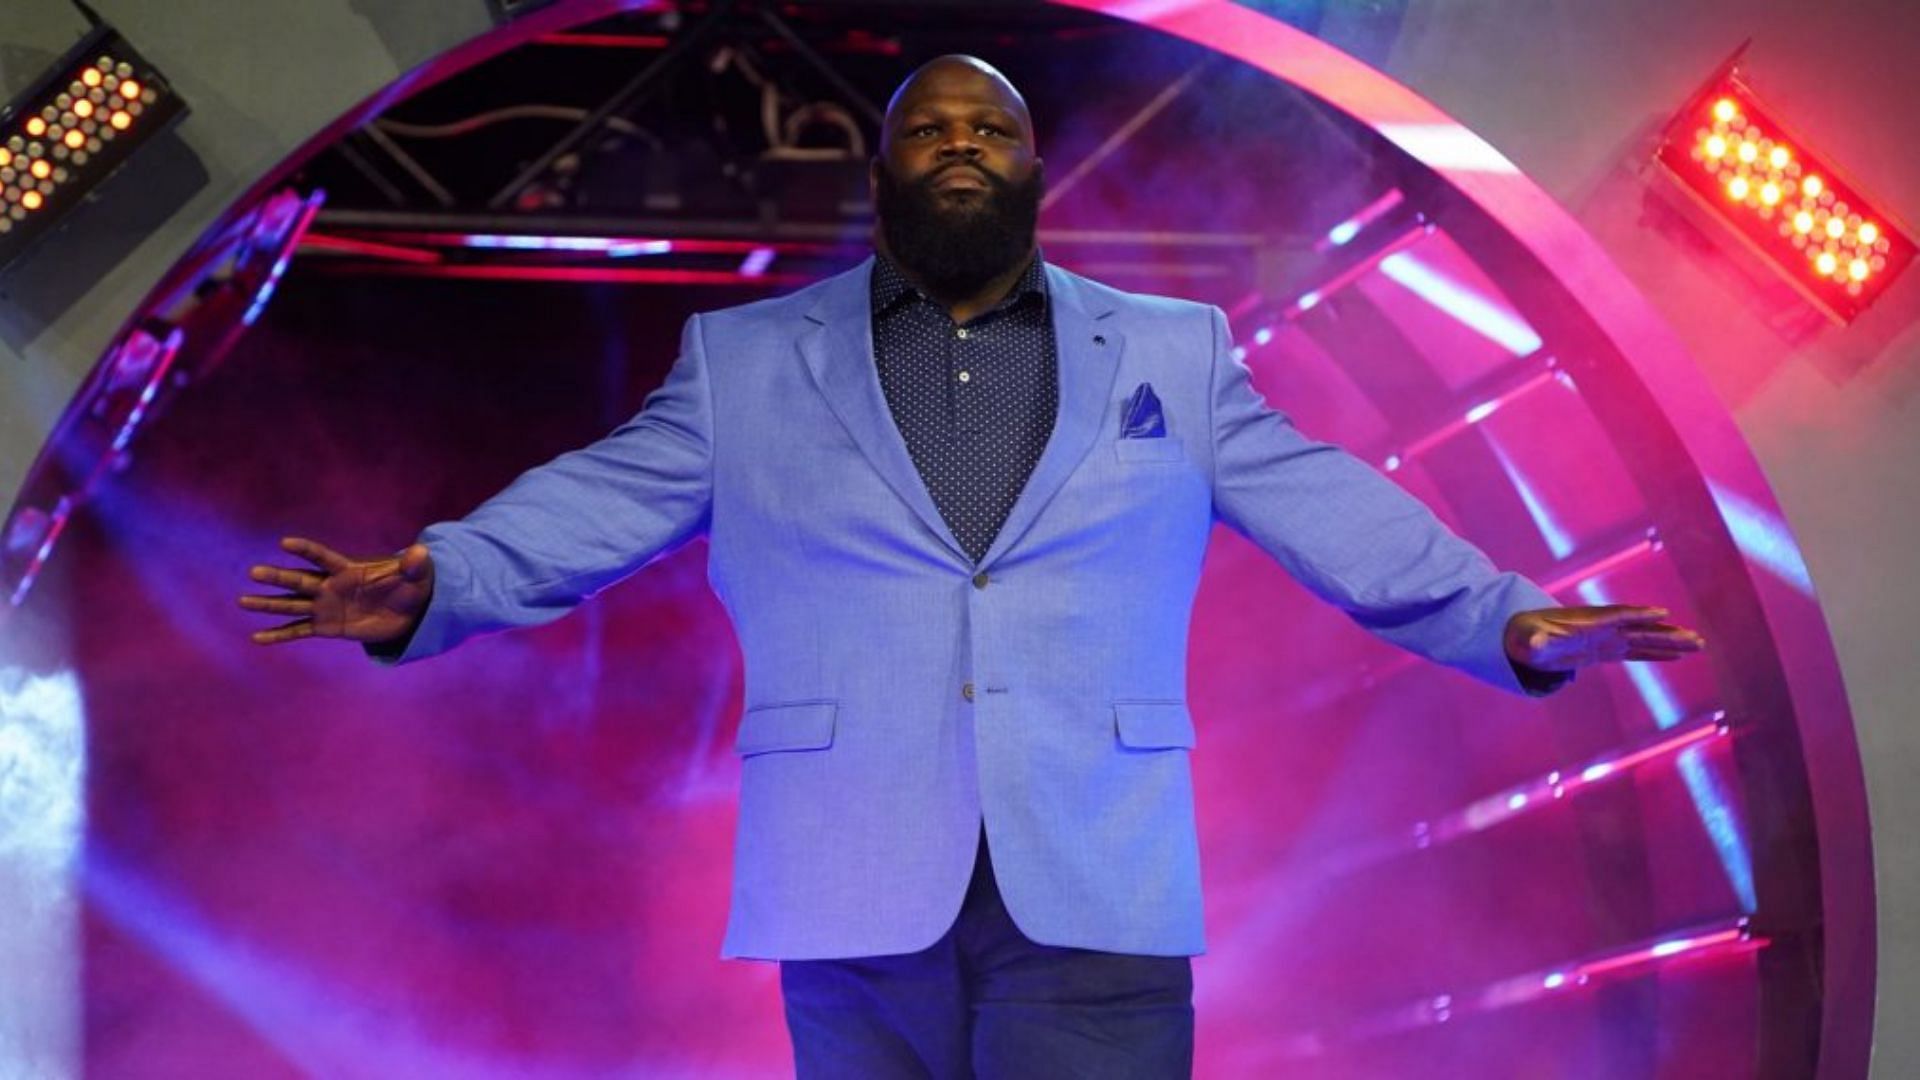 Mark Henry was inducted into WWE Hall of Fame in 2018.